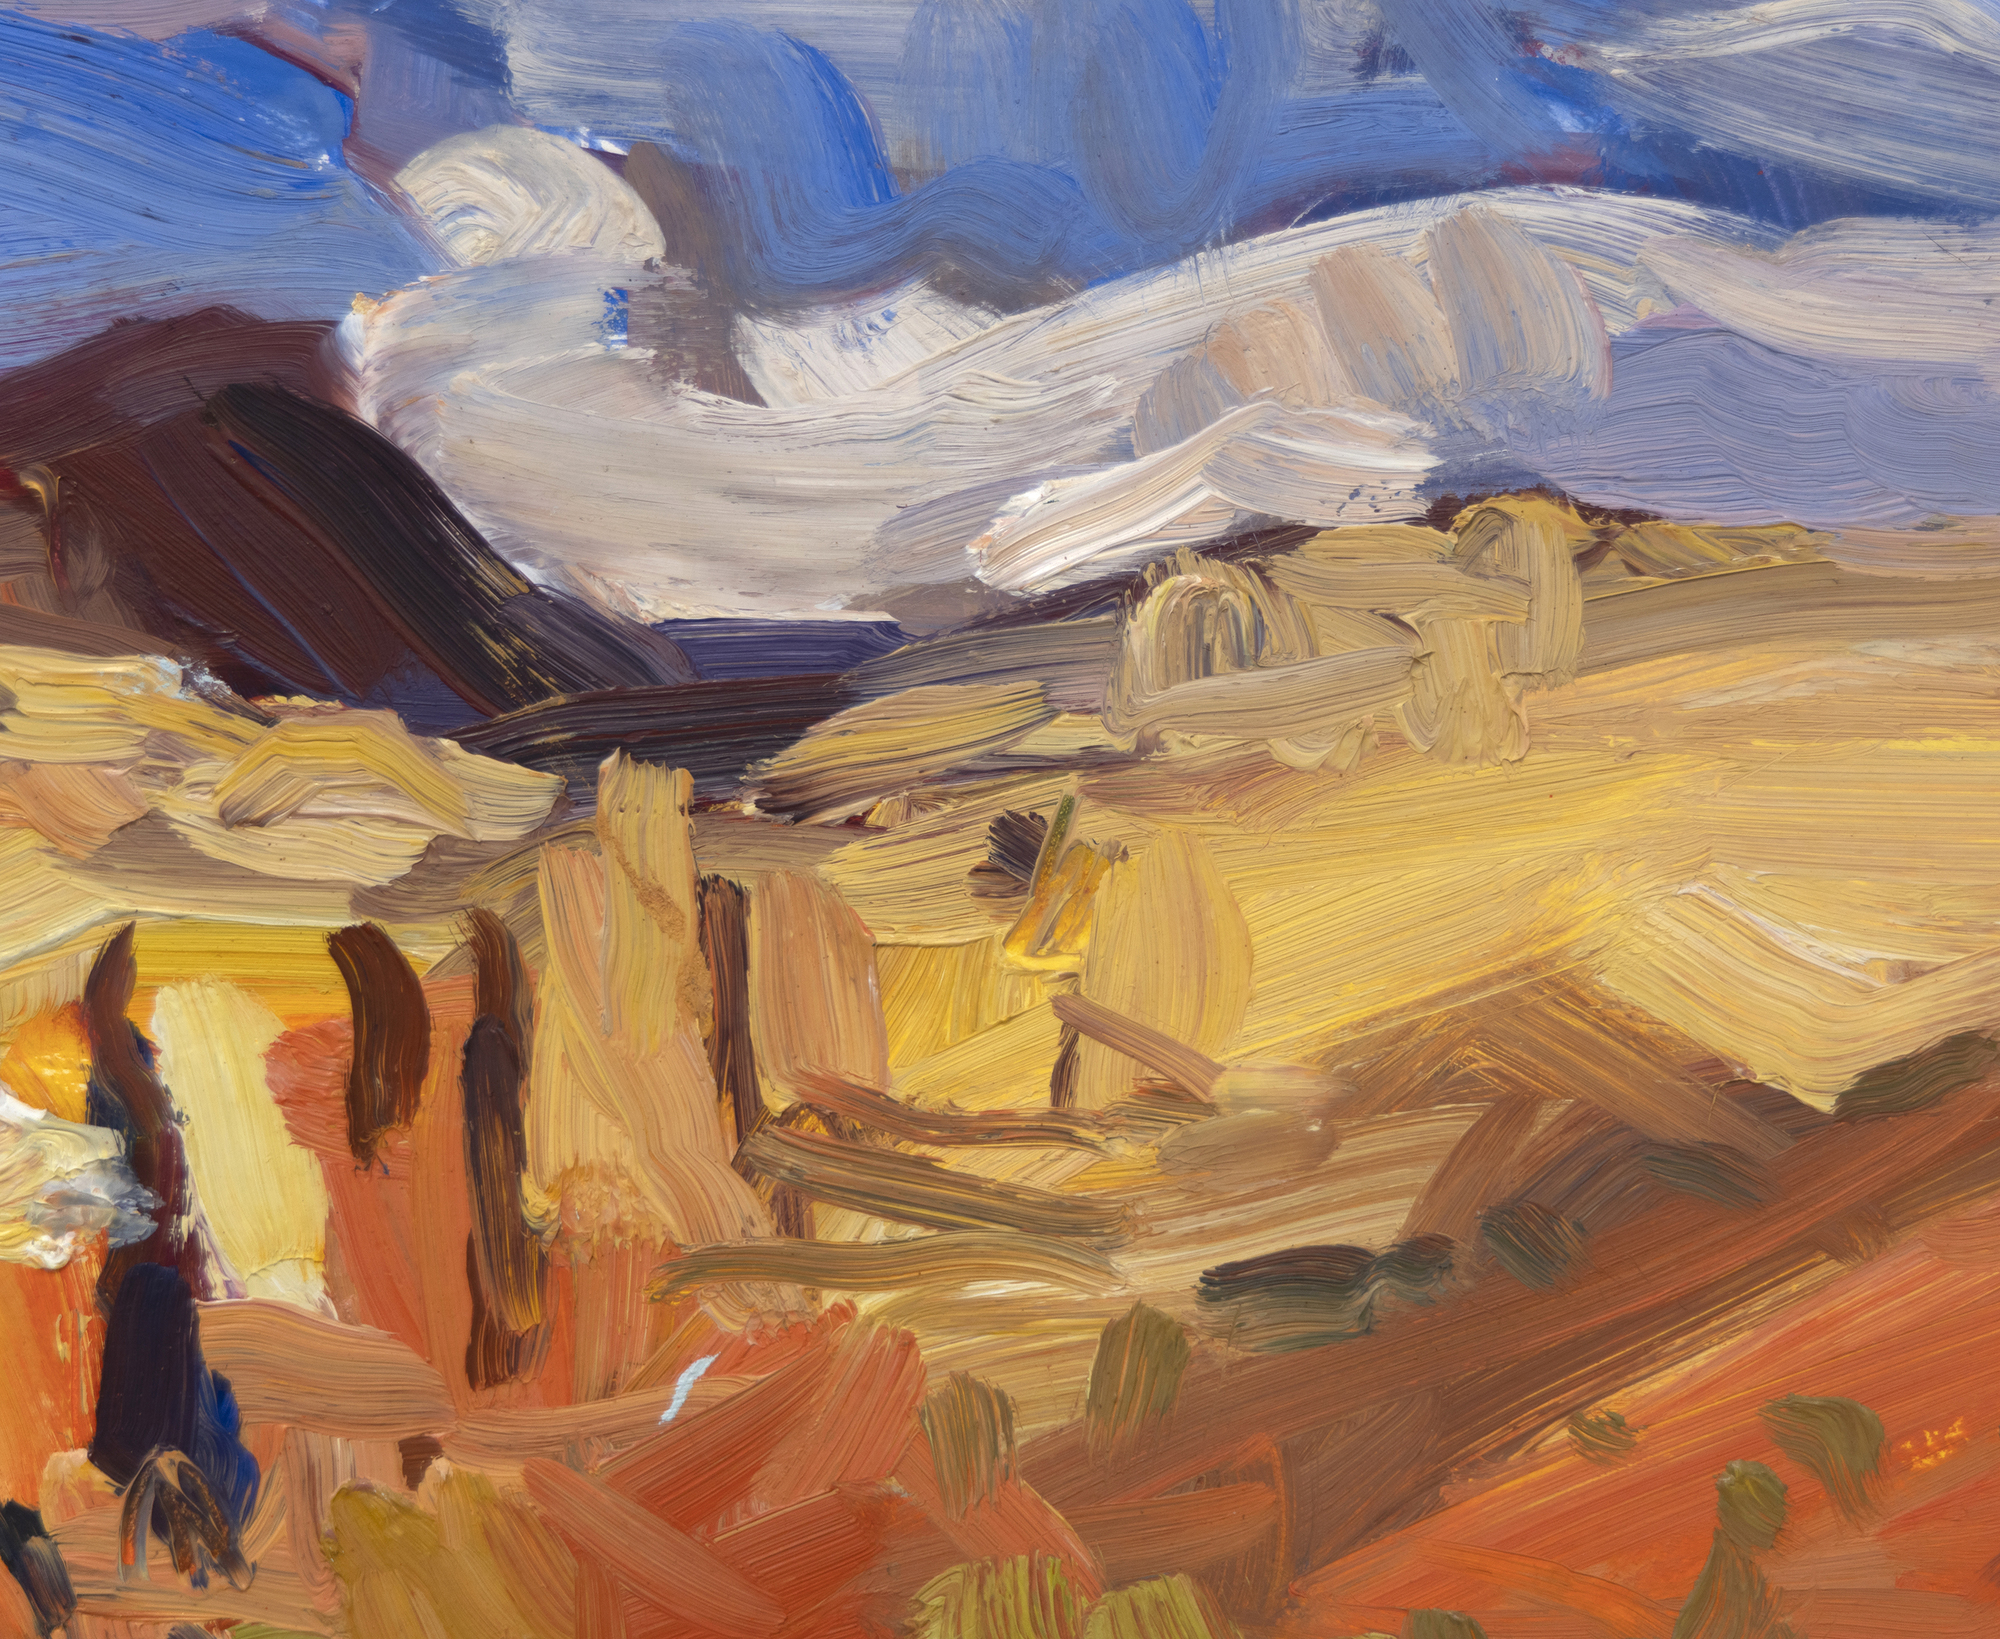 In 1995, Duncan Martin left full-time teaching at the Principia College Studio Art facility to focus on painting and lived in New Mexico, Arizona, and Colorado. Although he later returned to serve as a Professor of Art and Chair of the Art and Art History Department, he is retired and entirely devoted to en plein air landscape painting today. Martin usually begins with long, bold strokes using a palette knife or brush and adjusts with strokes that become smaller, more controlled, and more detailed. He continues to observe, making visual assessments and incremental finishing touches using both ends of the brush. As a painter, Martin is interested in something other than creating facile representational paintings. Instead, he hopes to understand some essential truth not necessarily revealed in its physical details.